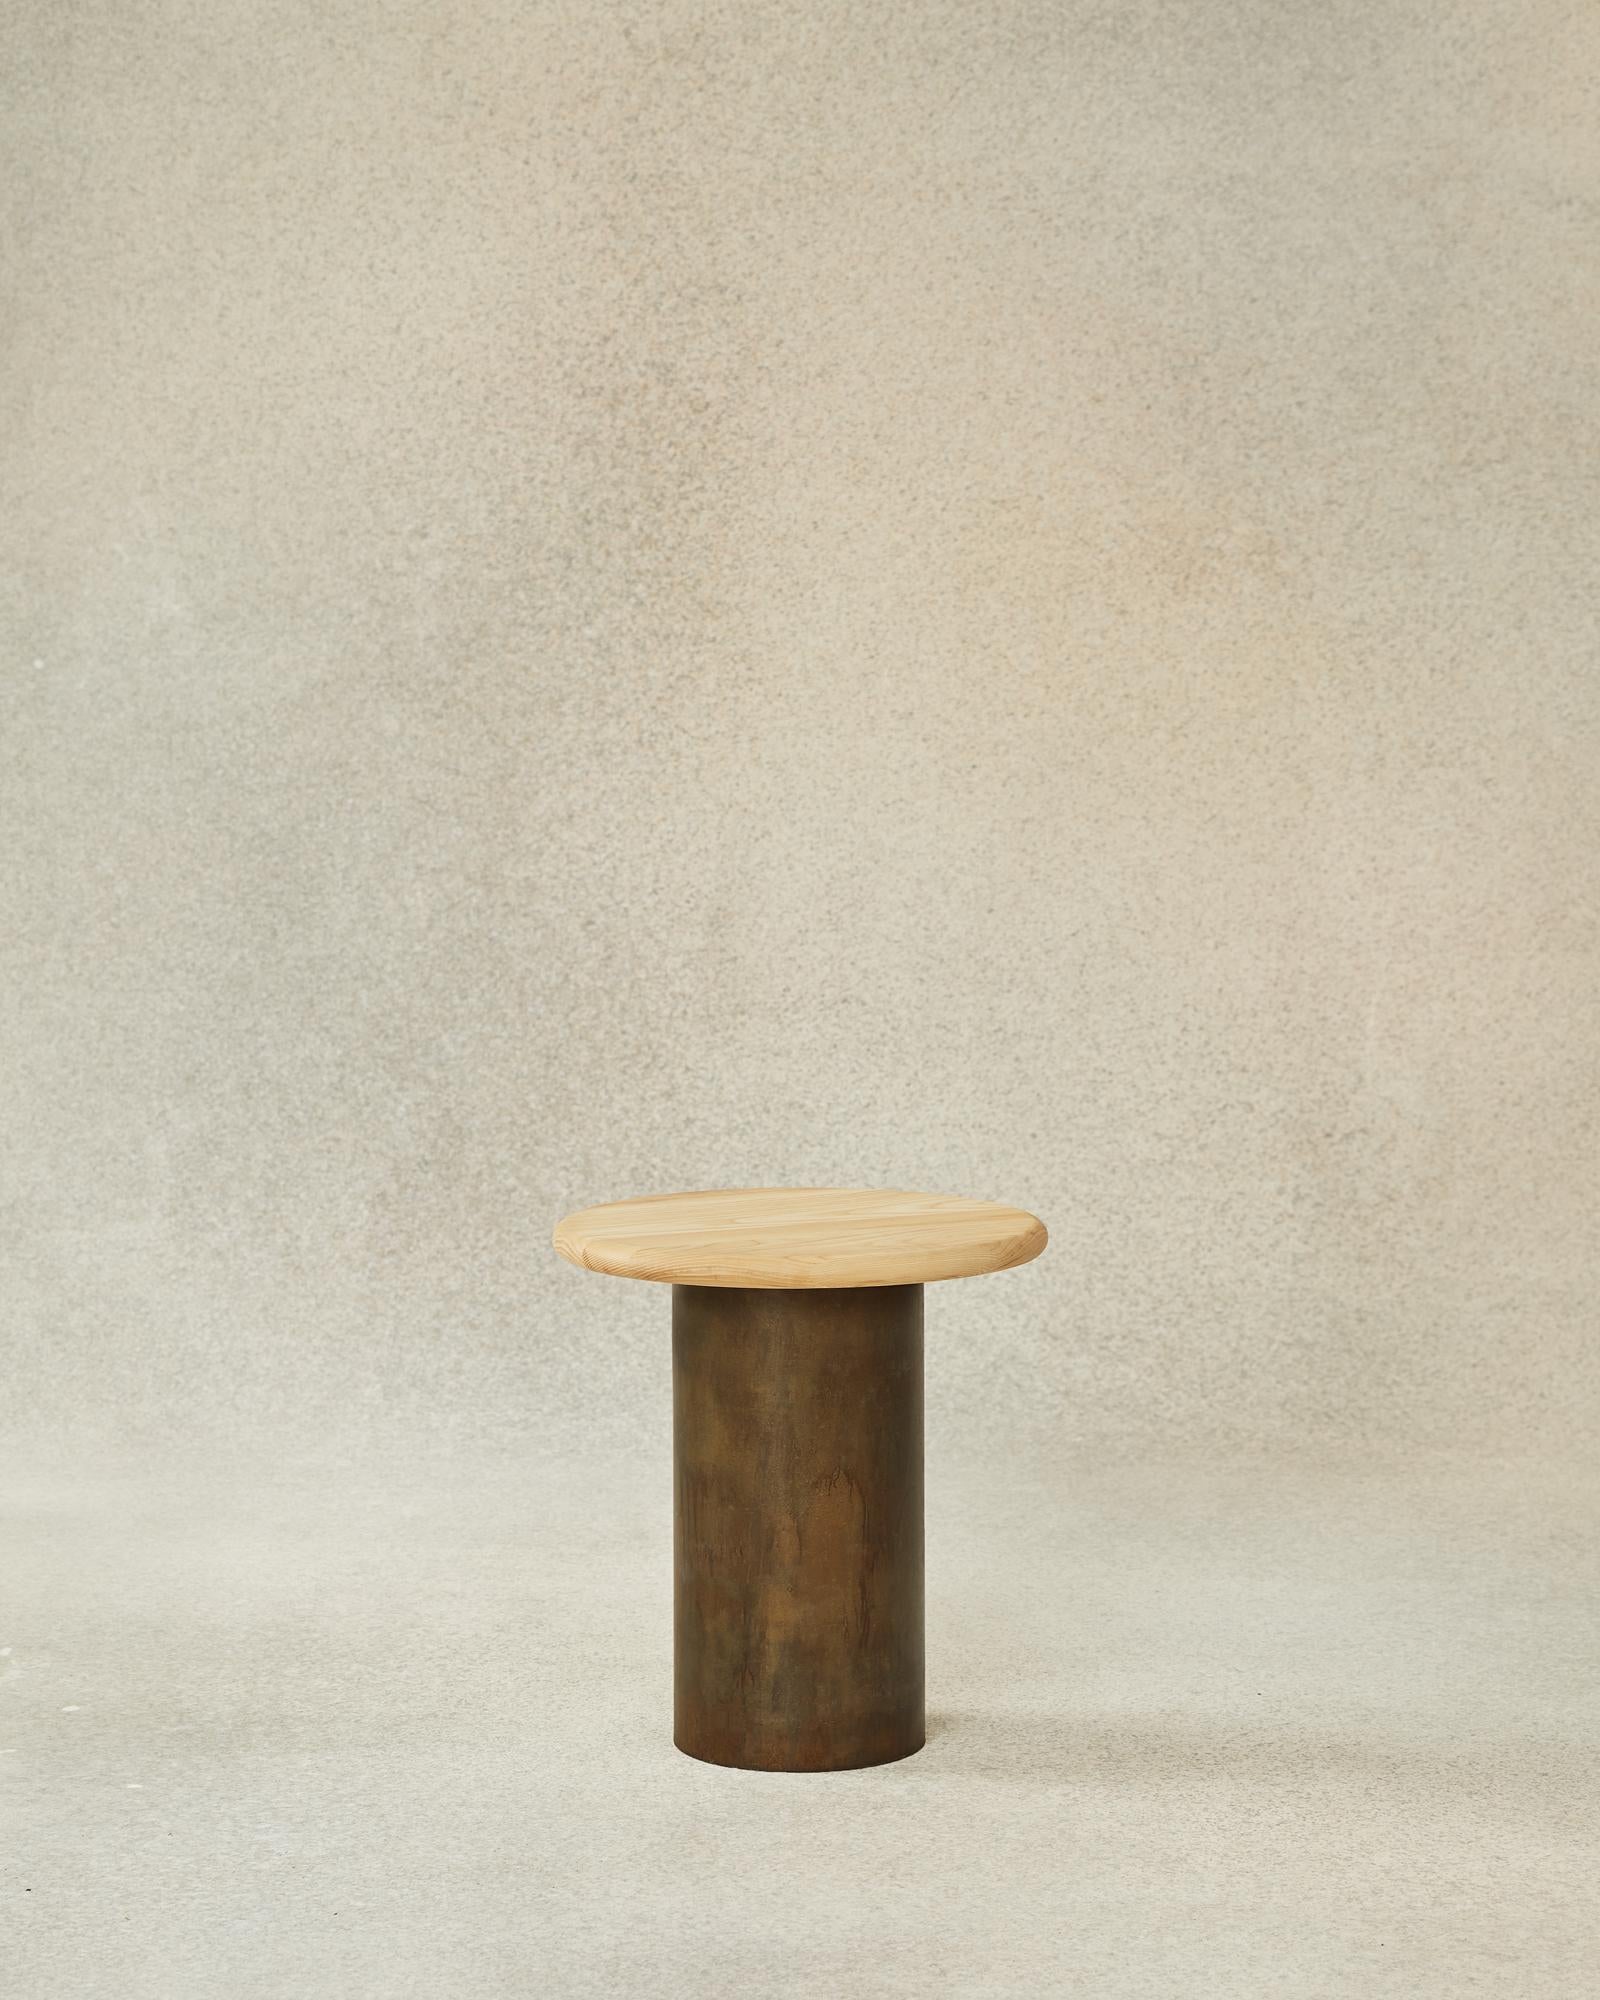 The Raindrop 400 is the second to smallest side table, perfect to pair with an 800 or 1000 Raindrop, and now available in a range of finishes to suit any interior or style. The raindrops nestle together to form a cascading series of tables in height